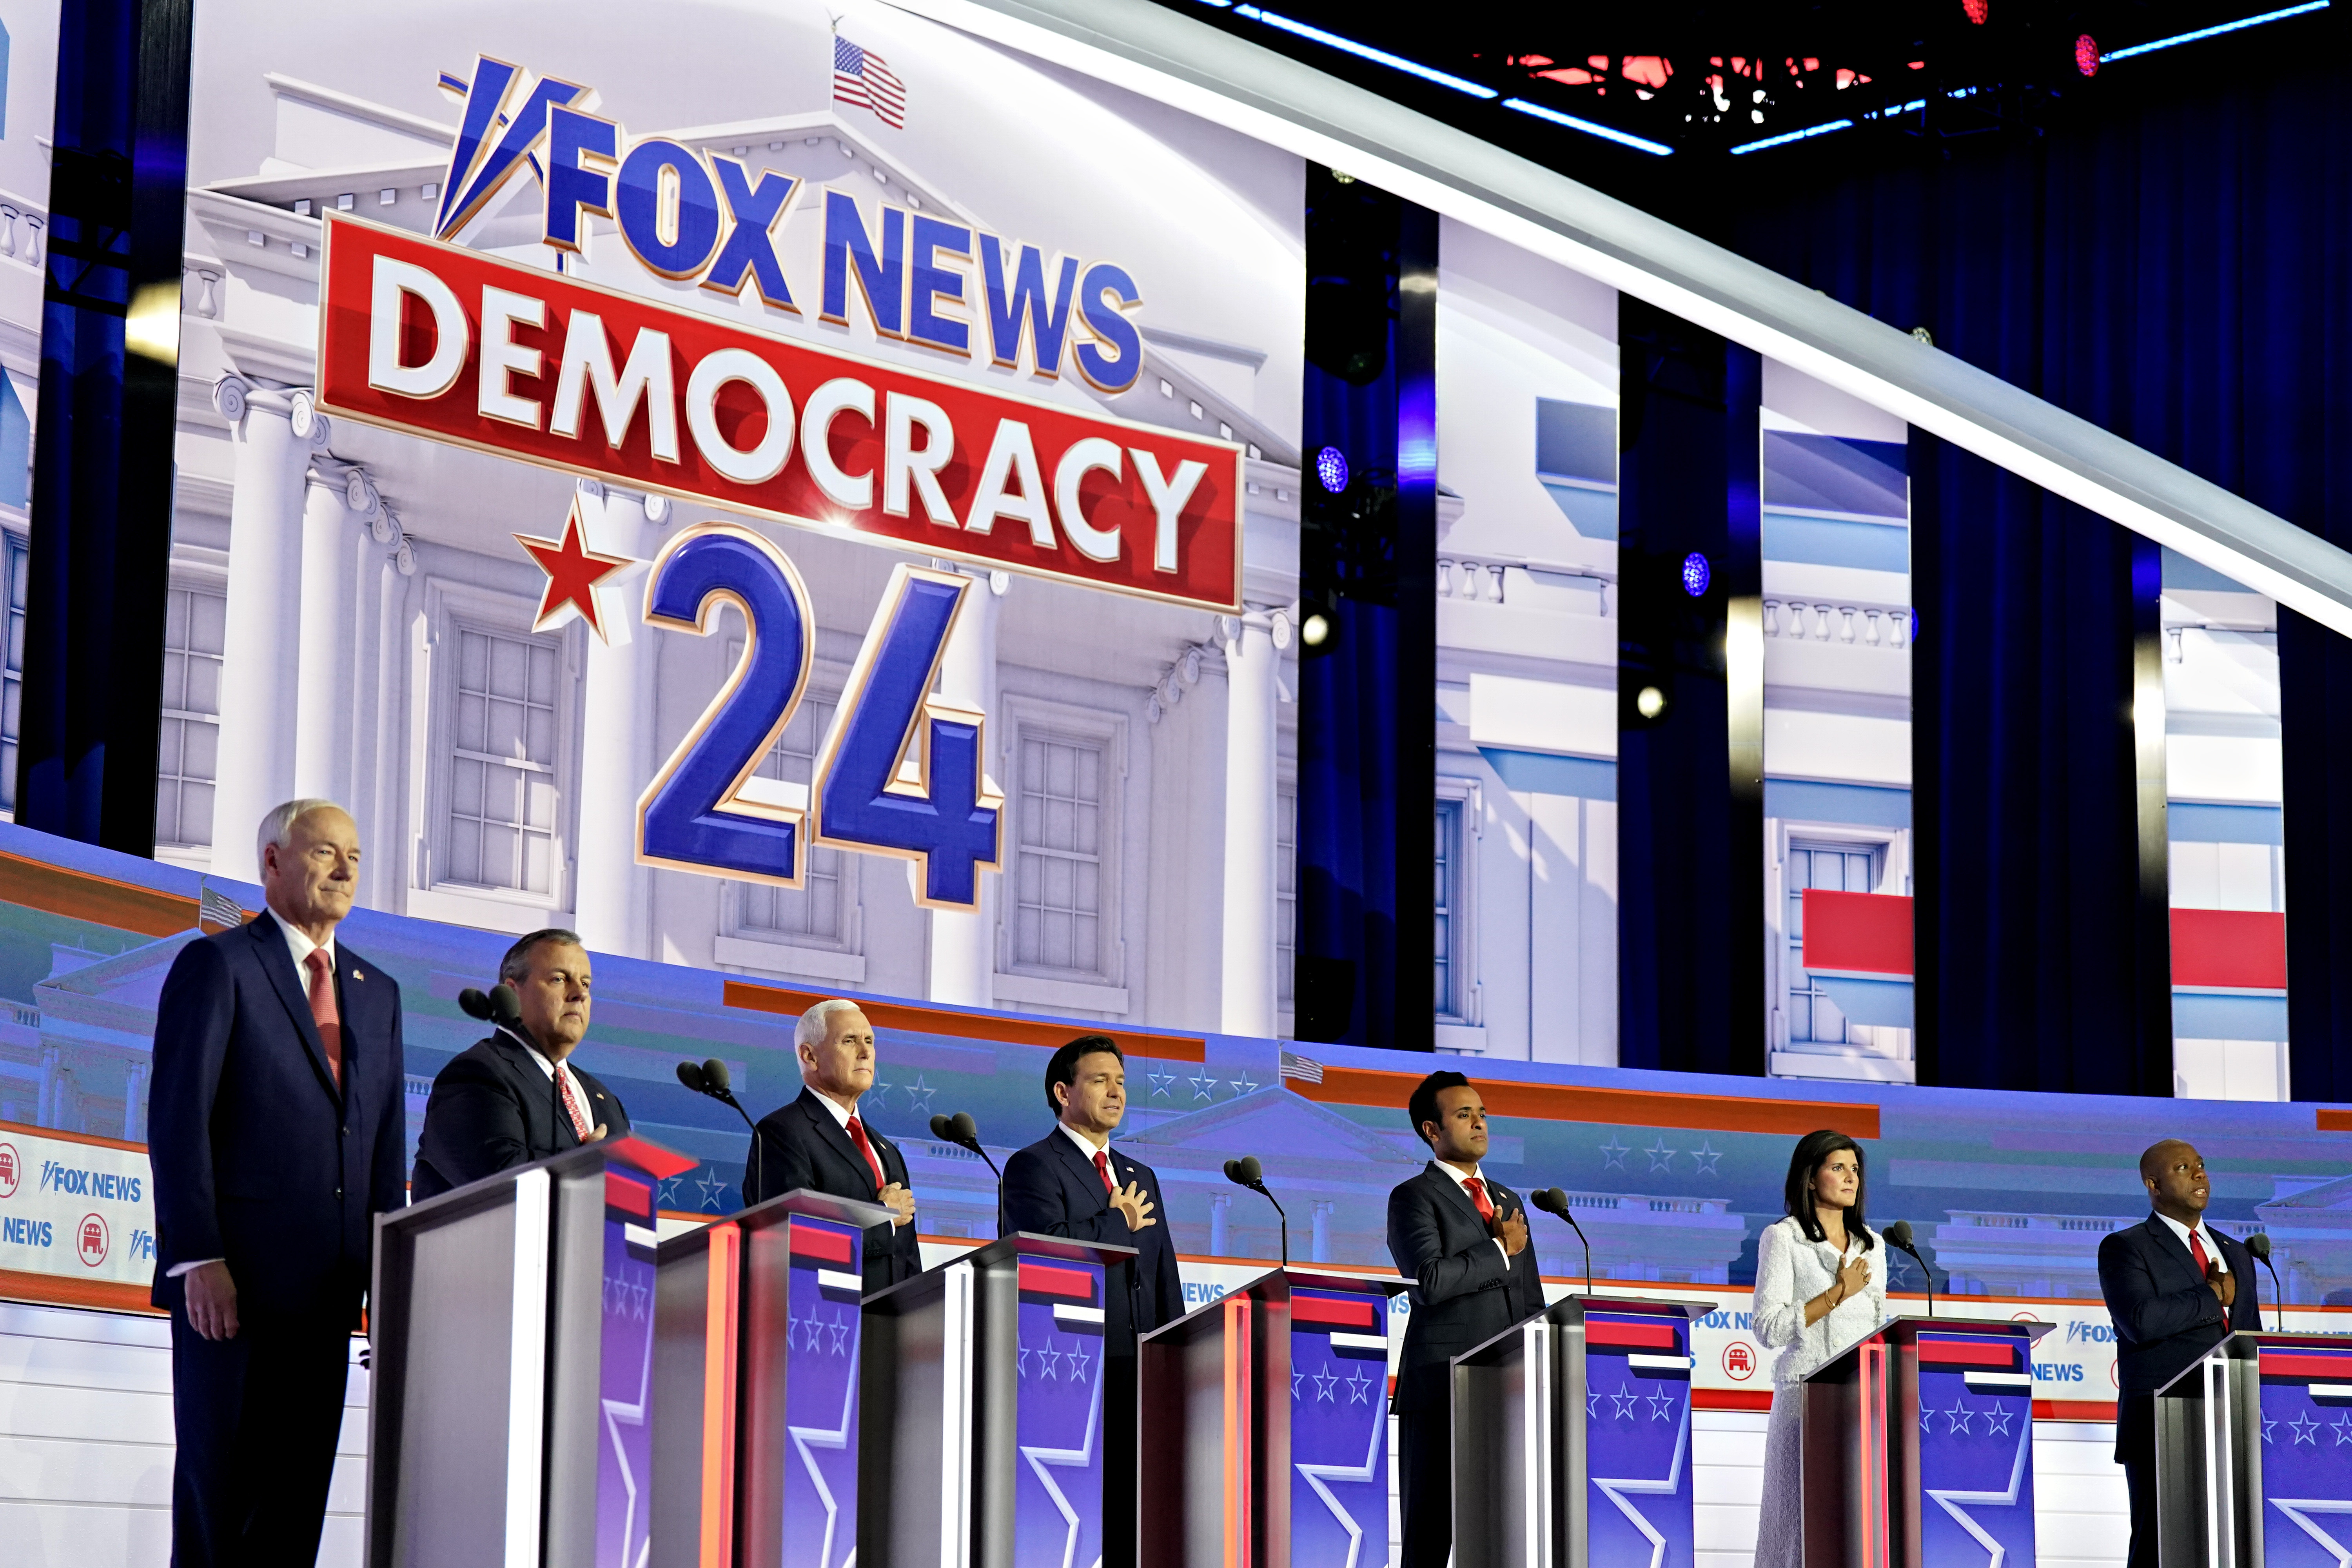 The Republican debate stage with candidates behind podiums in a row.